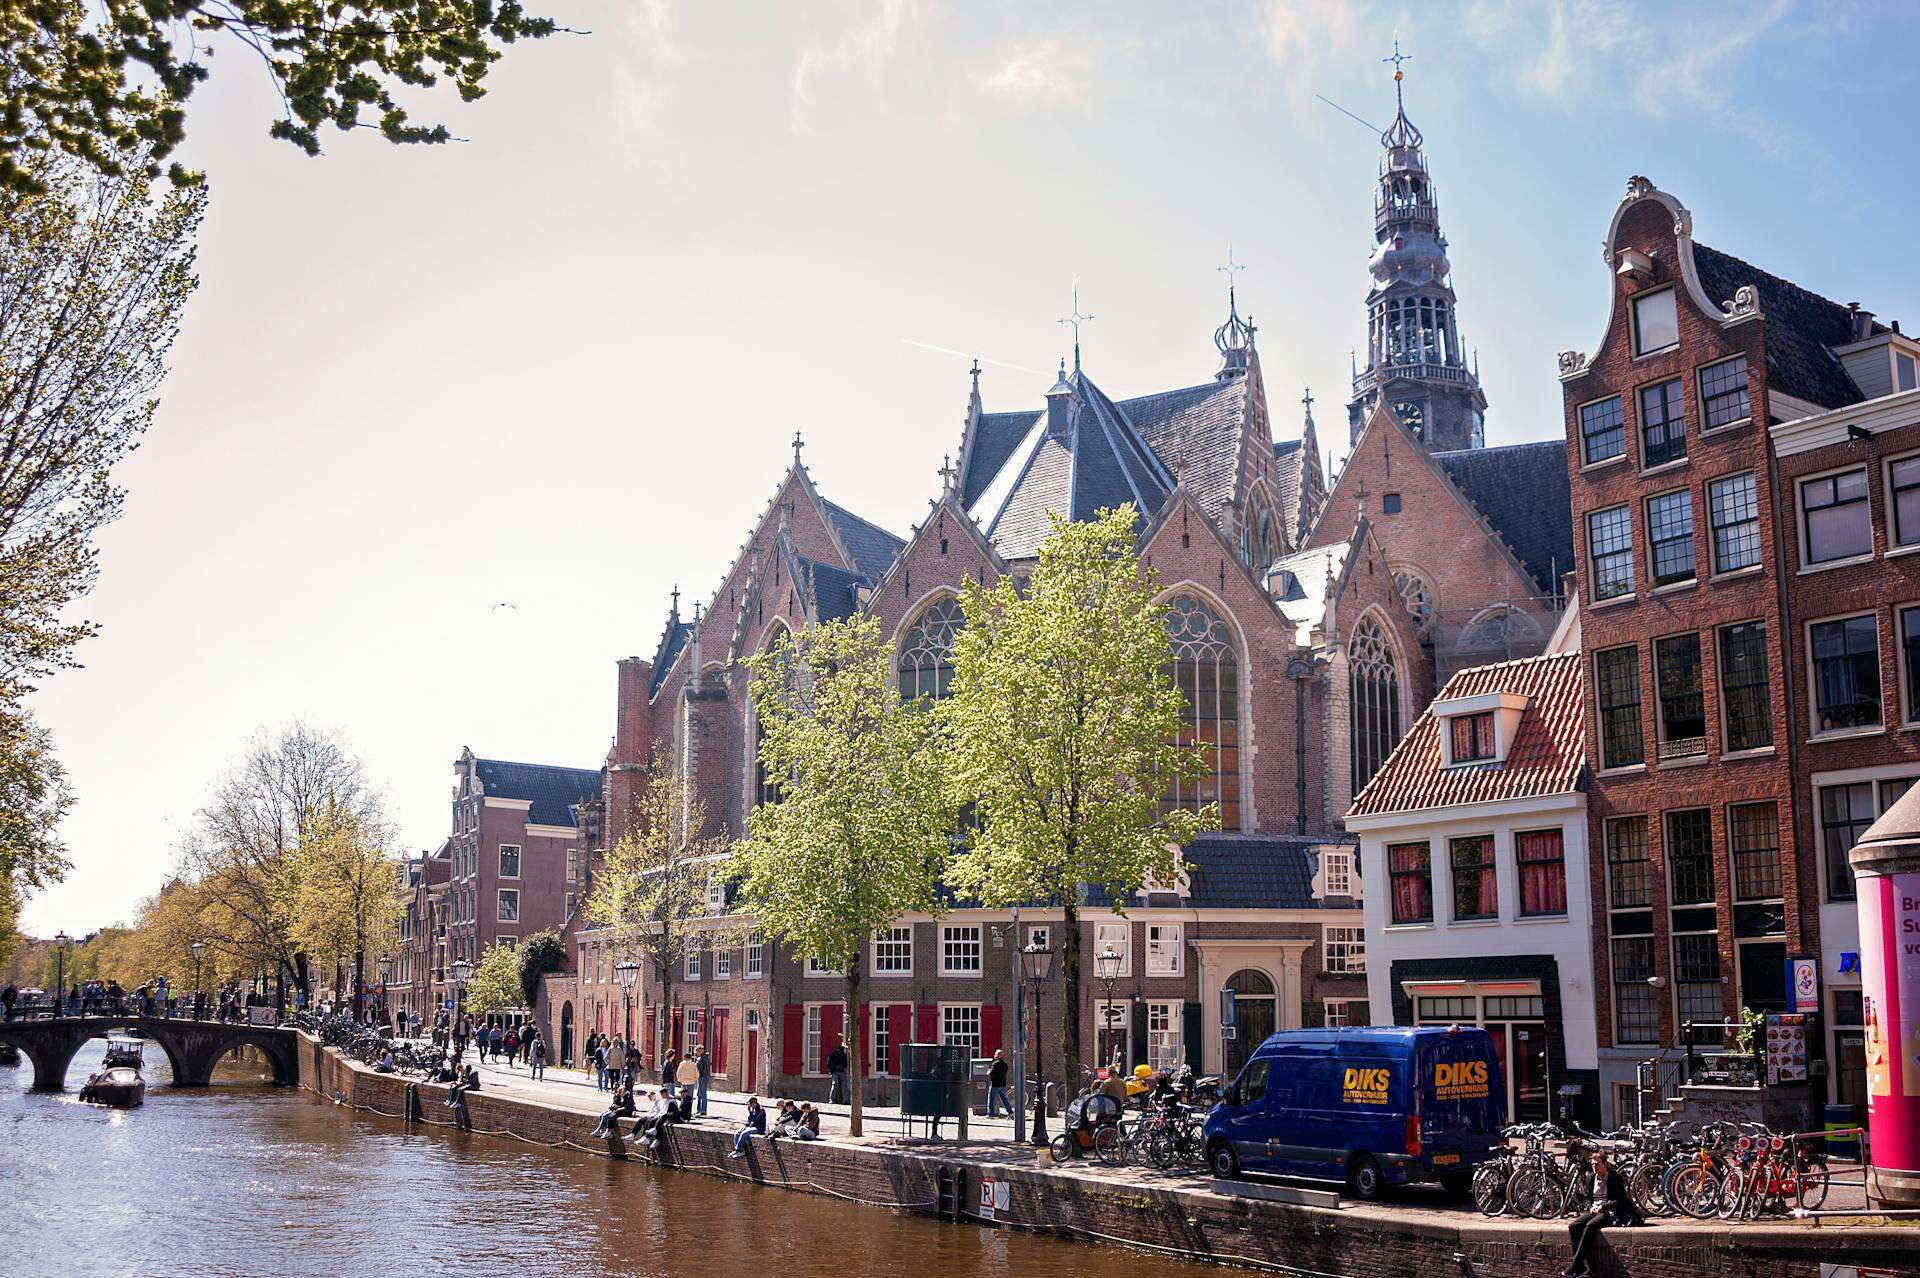 The historic Oude Kerk in Amsterdam, showcasing its stunning Gothic architecture and intricate stained glass windows.